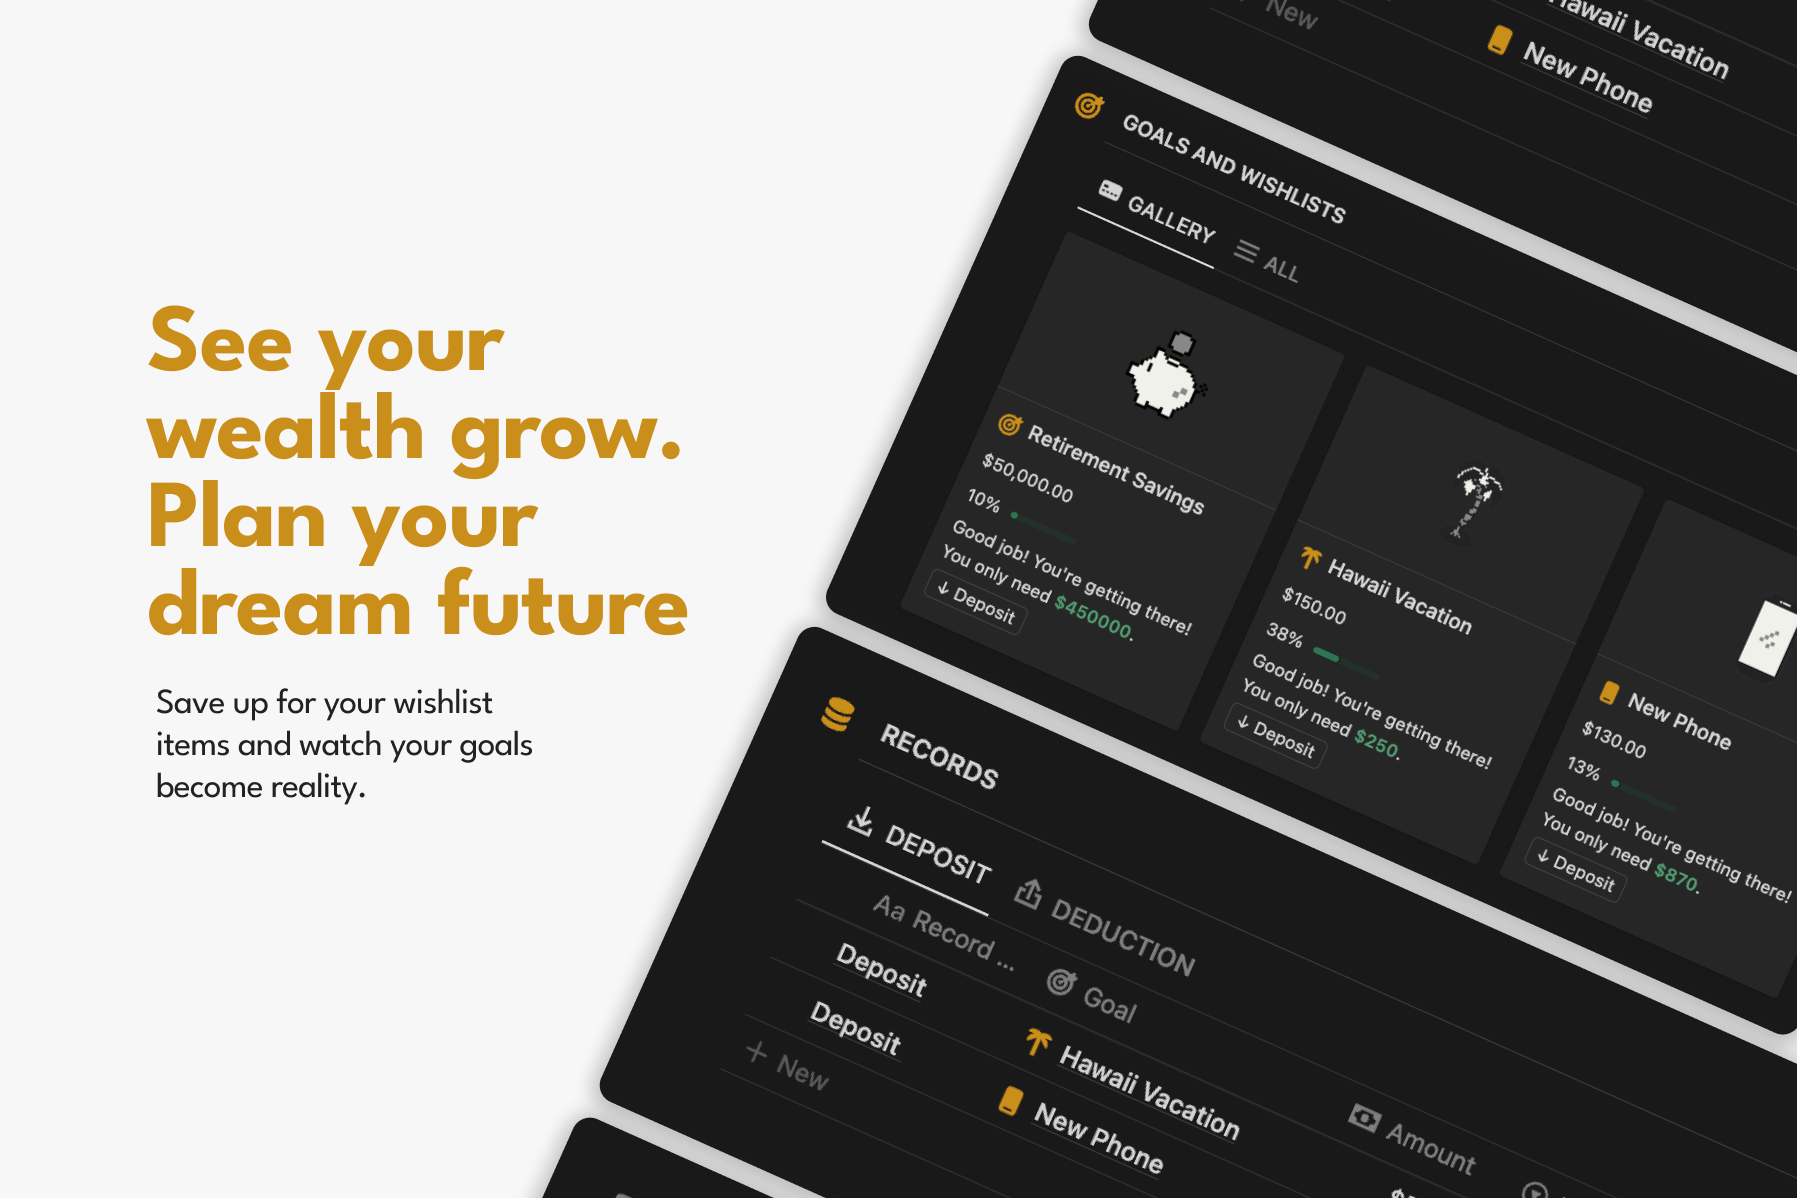 Financial Goals & Wishlists Tracker: Take Control of Your Financial Future 📈